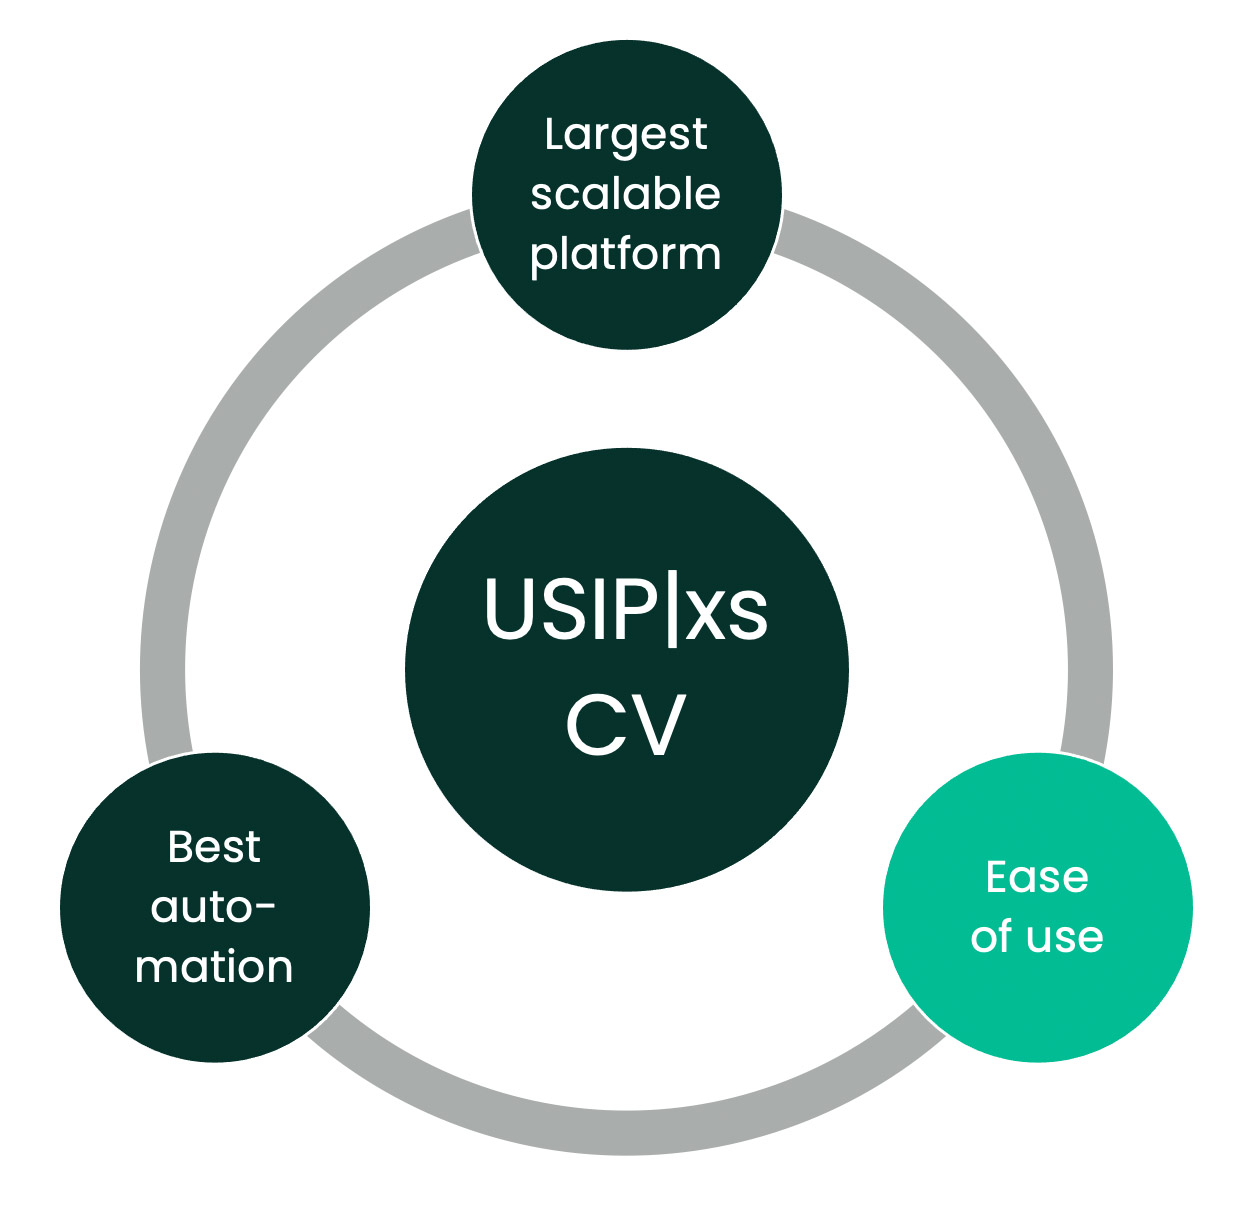 USIPxs Ease of Use